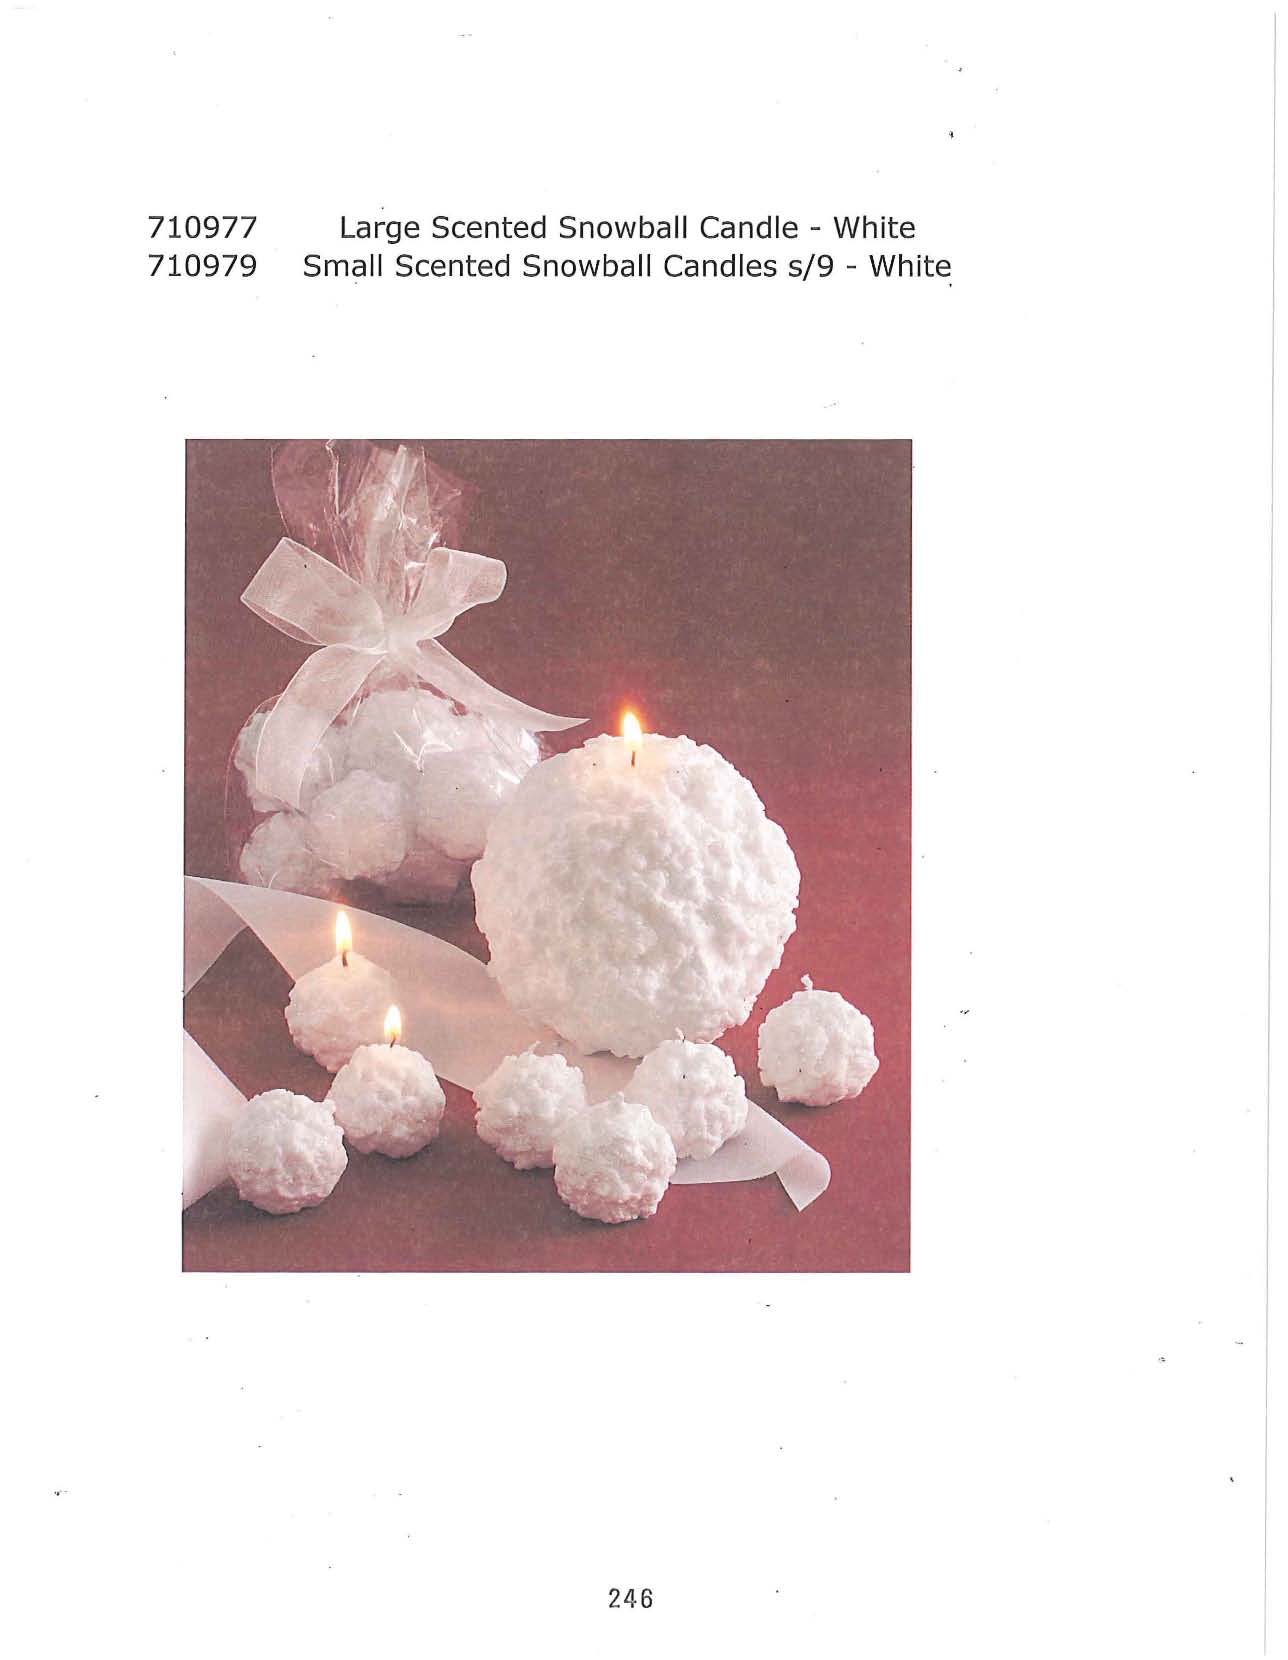 Small s/9 and Large Scented Snowball Candle - White